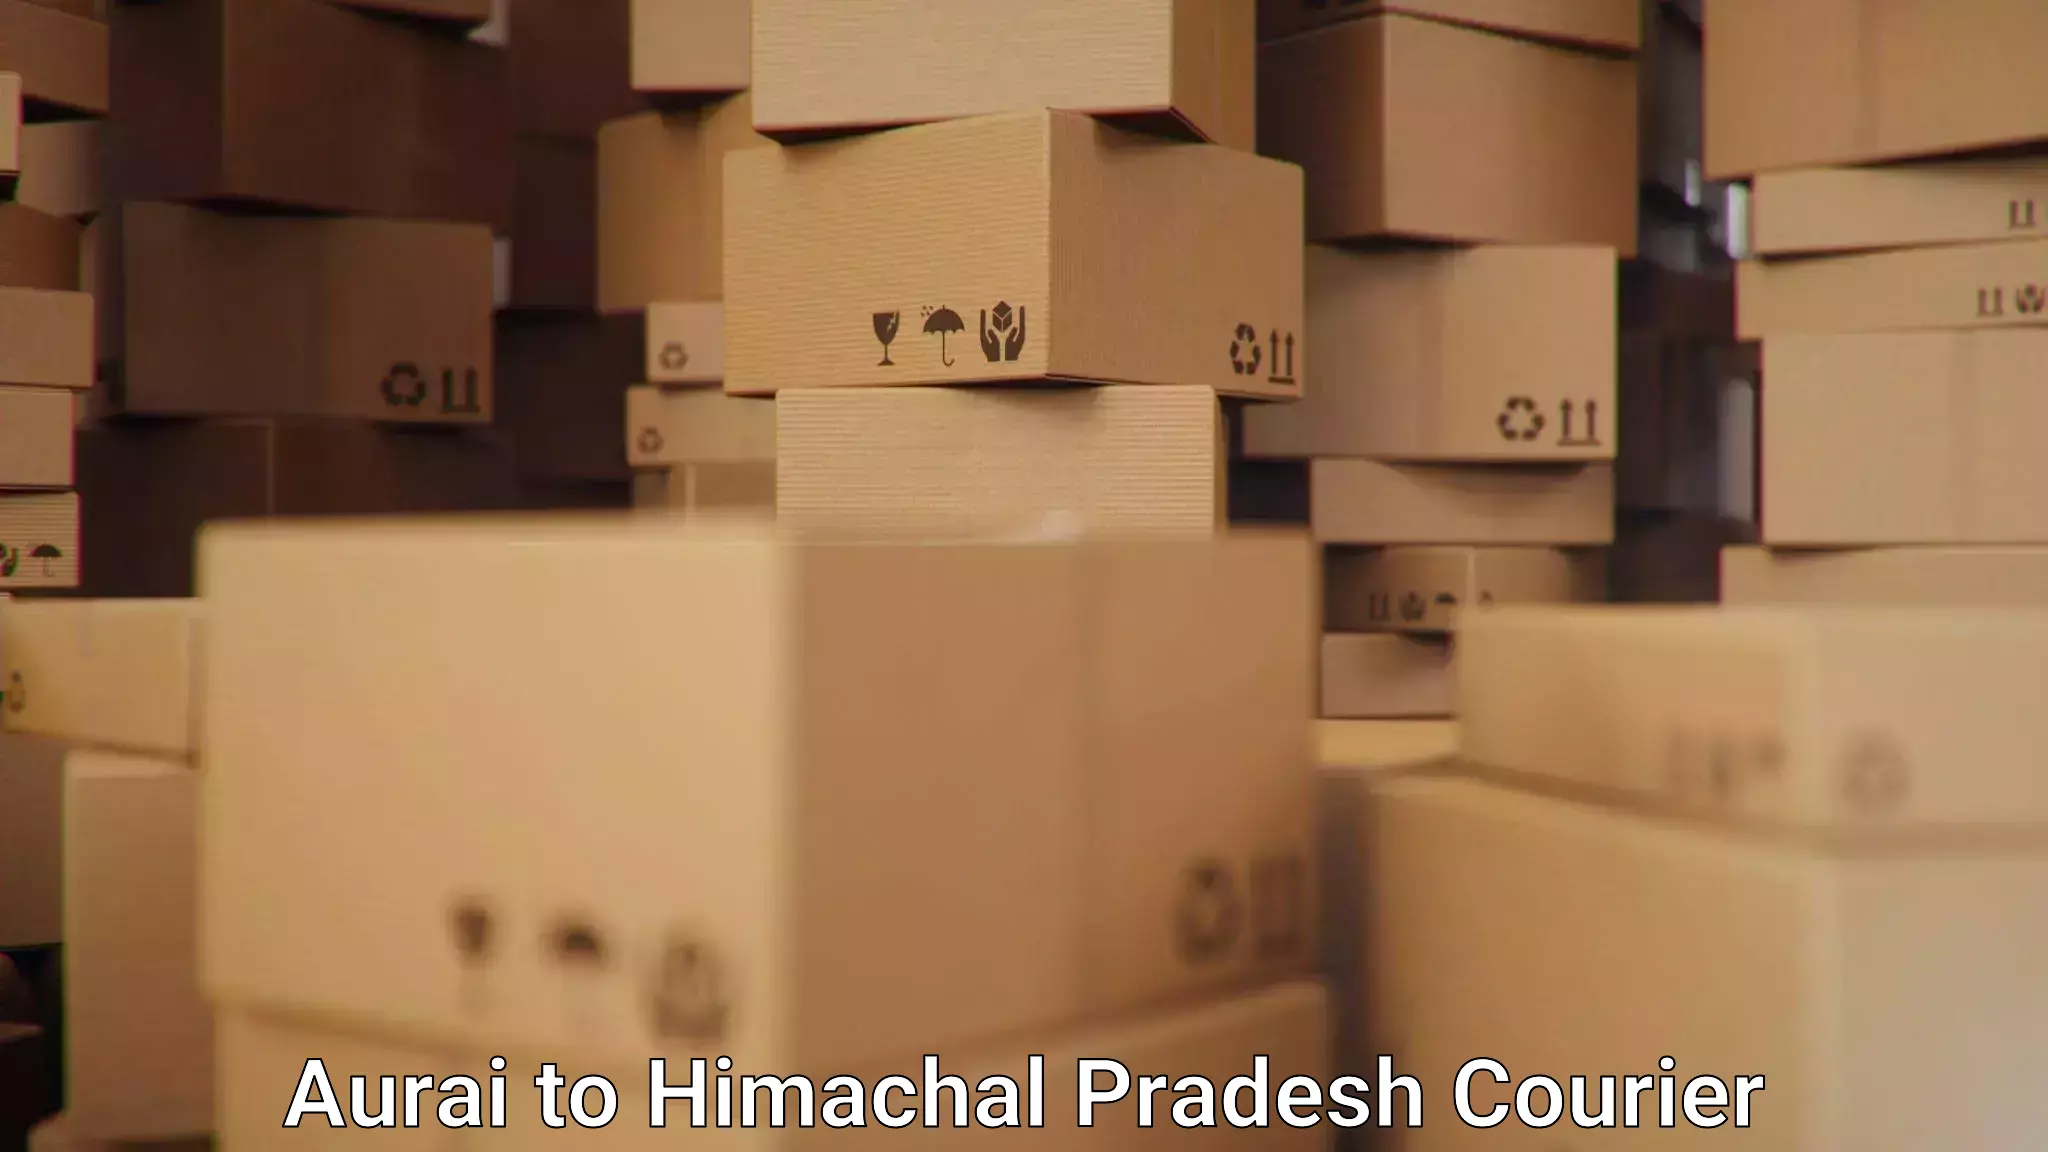 Customizable delivery plans Aurai to Himachal Pradesh